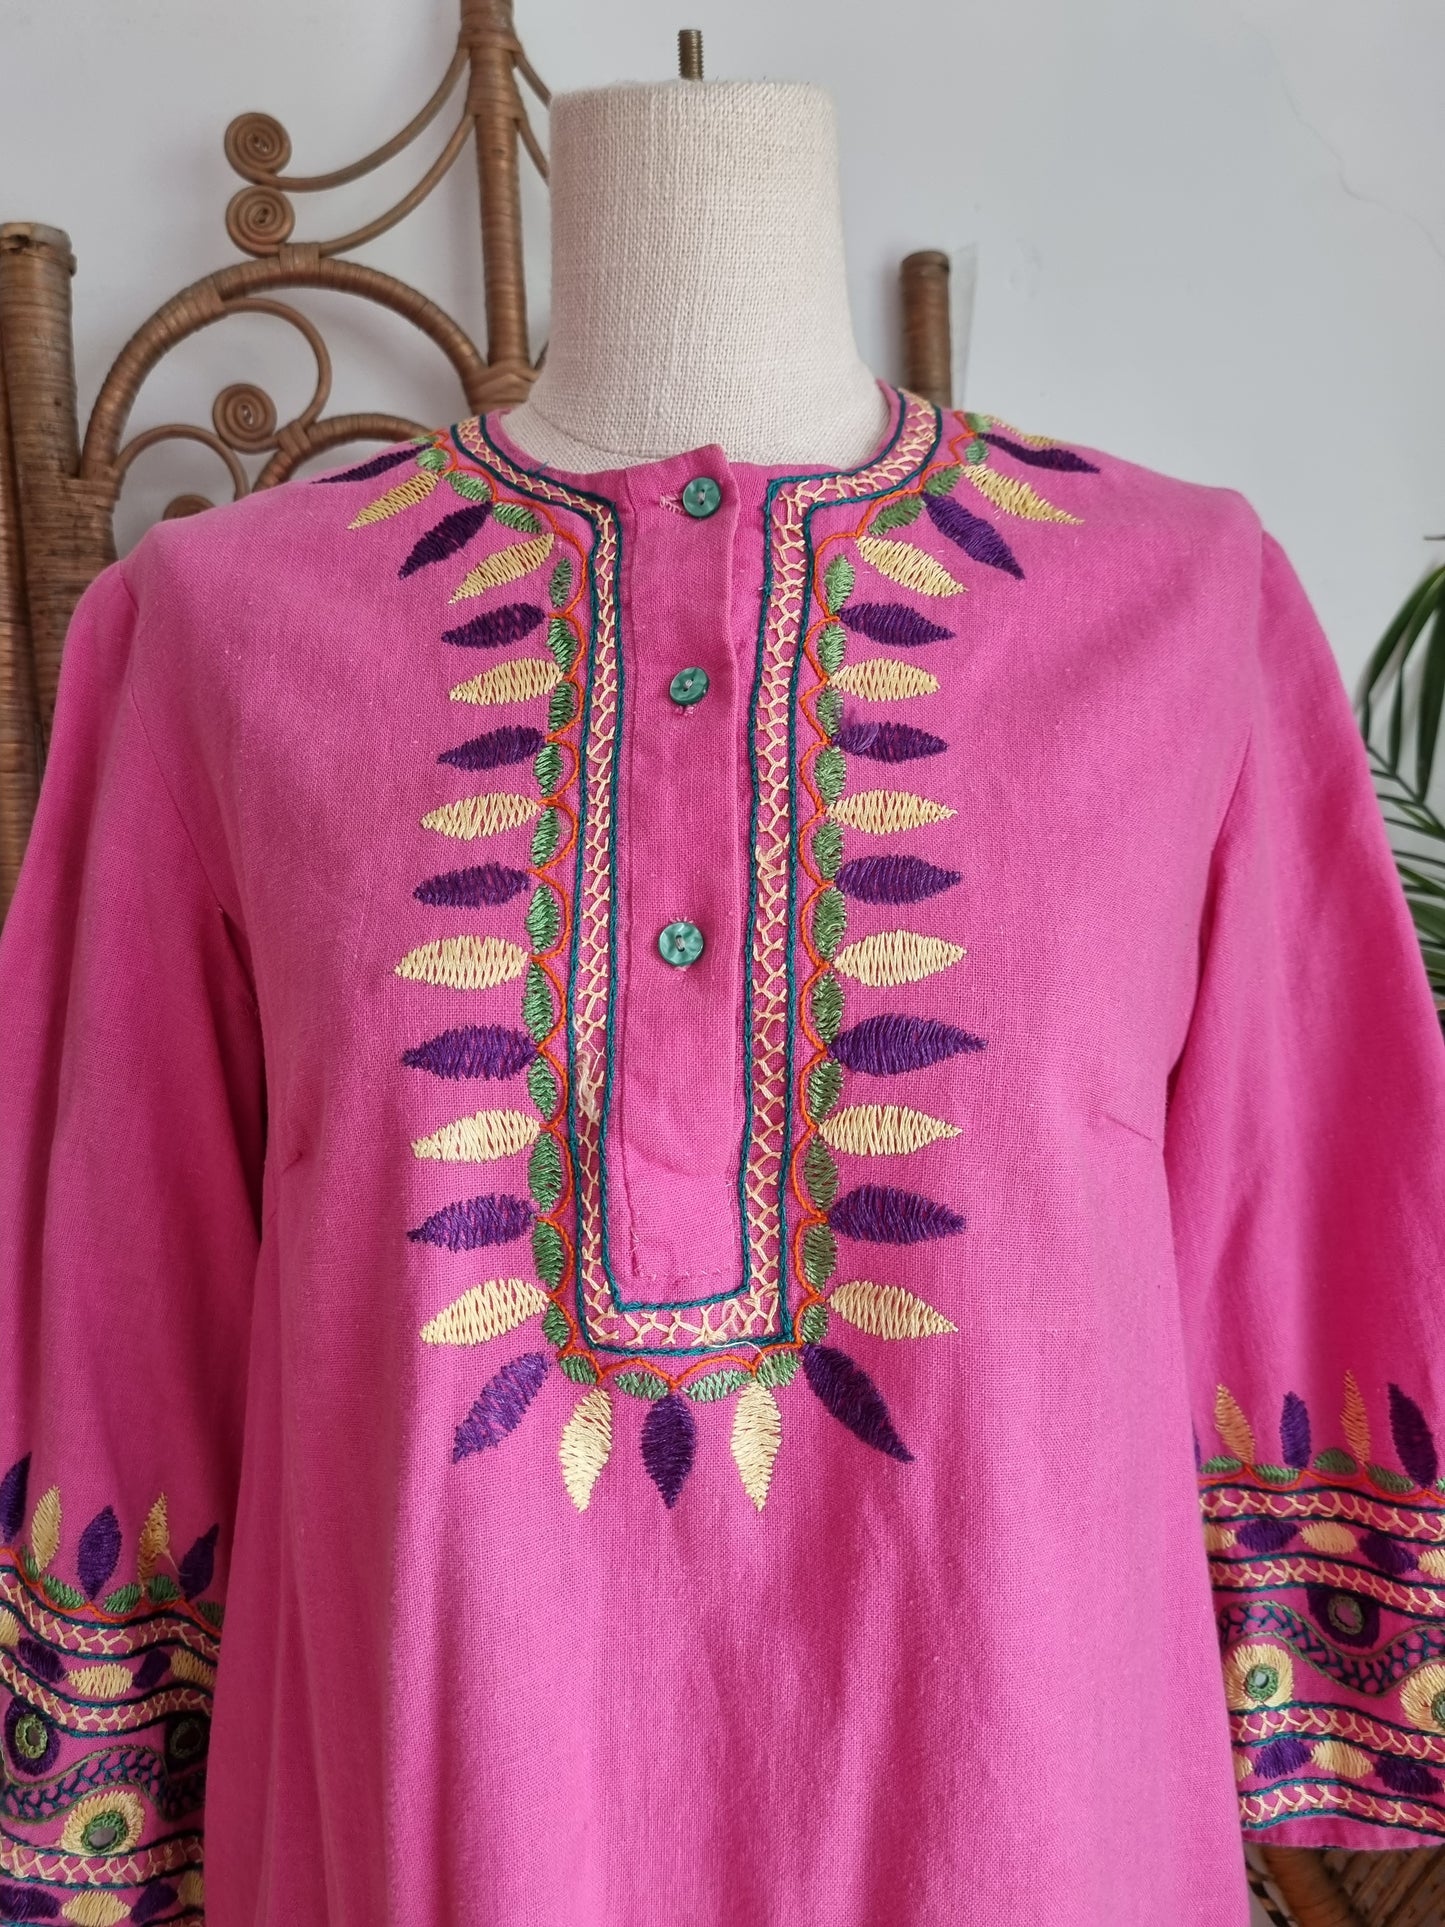 Vintage embroidered Indian tunic dress